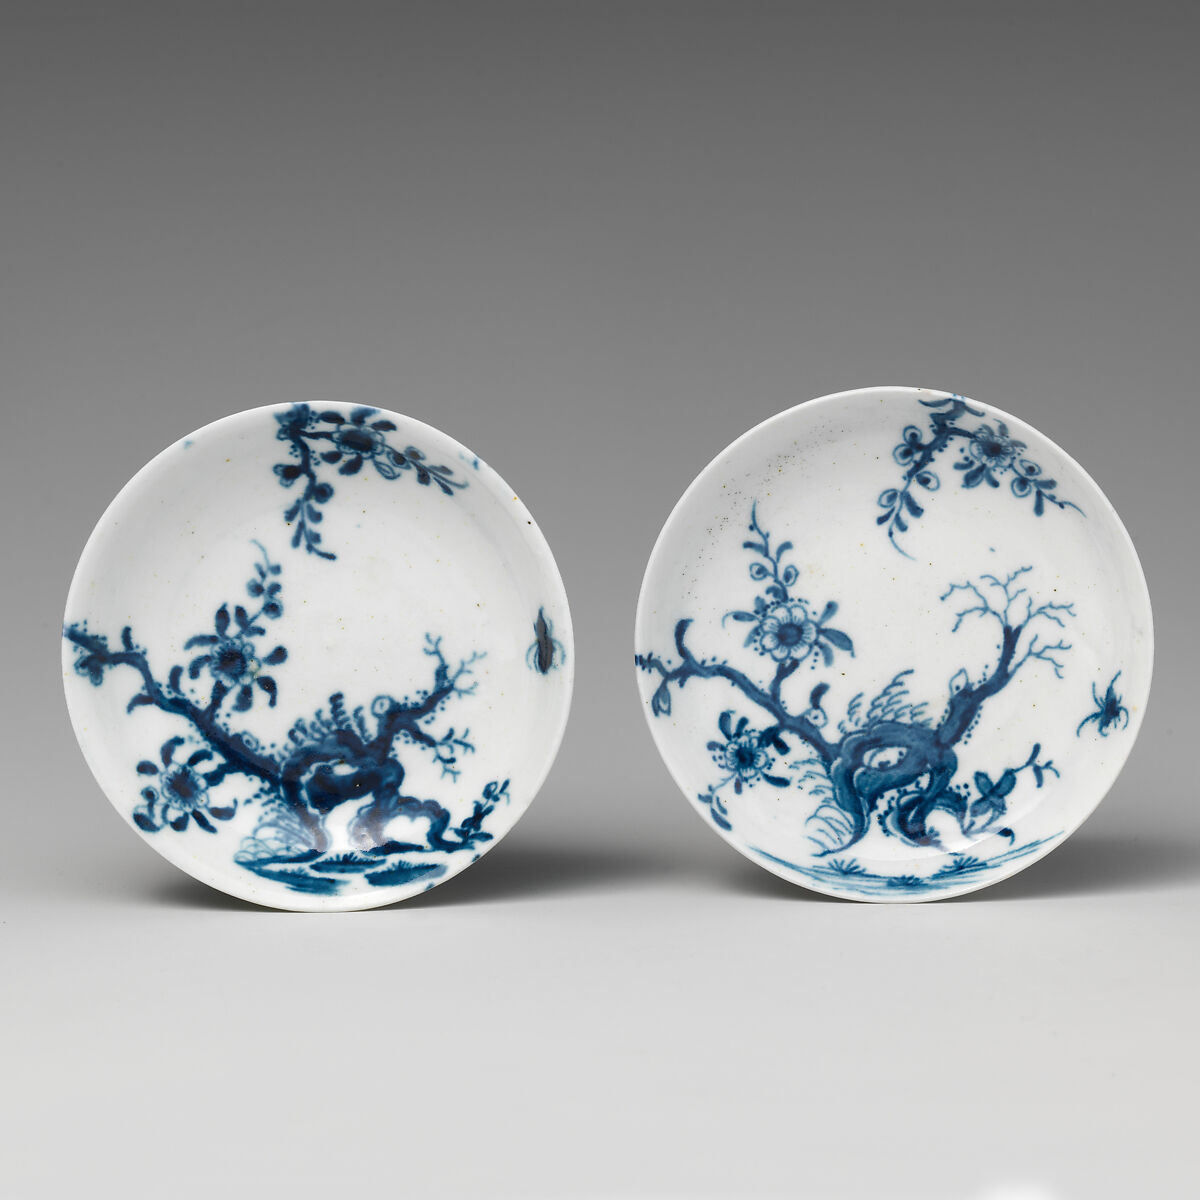 Two miniature dishes (part of a service), Worcester factory (British, 1751–2008), Soft-paste porcelain with underglaze blue, British, Worcester 